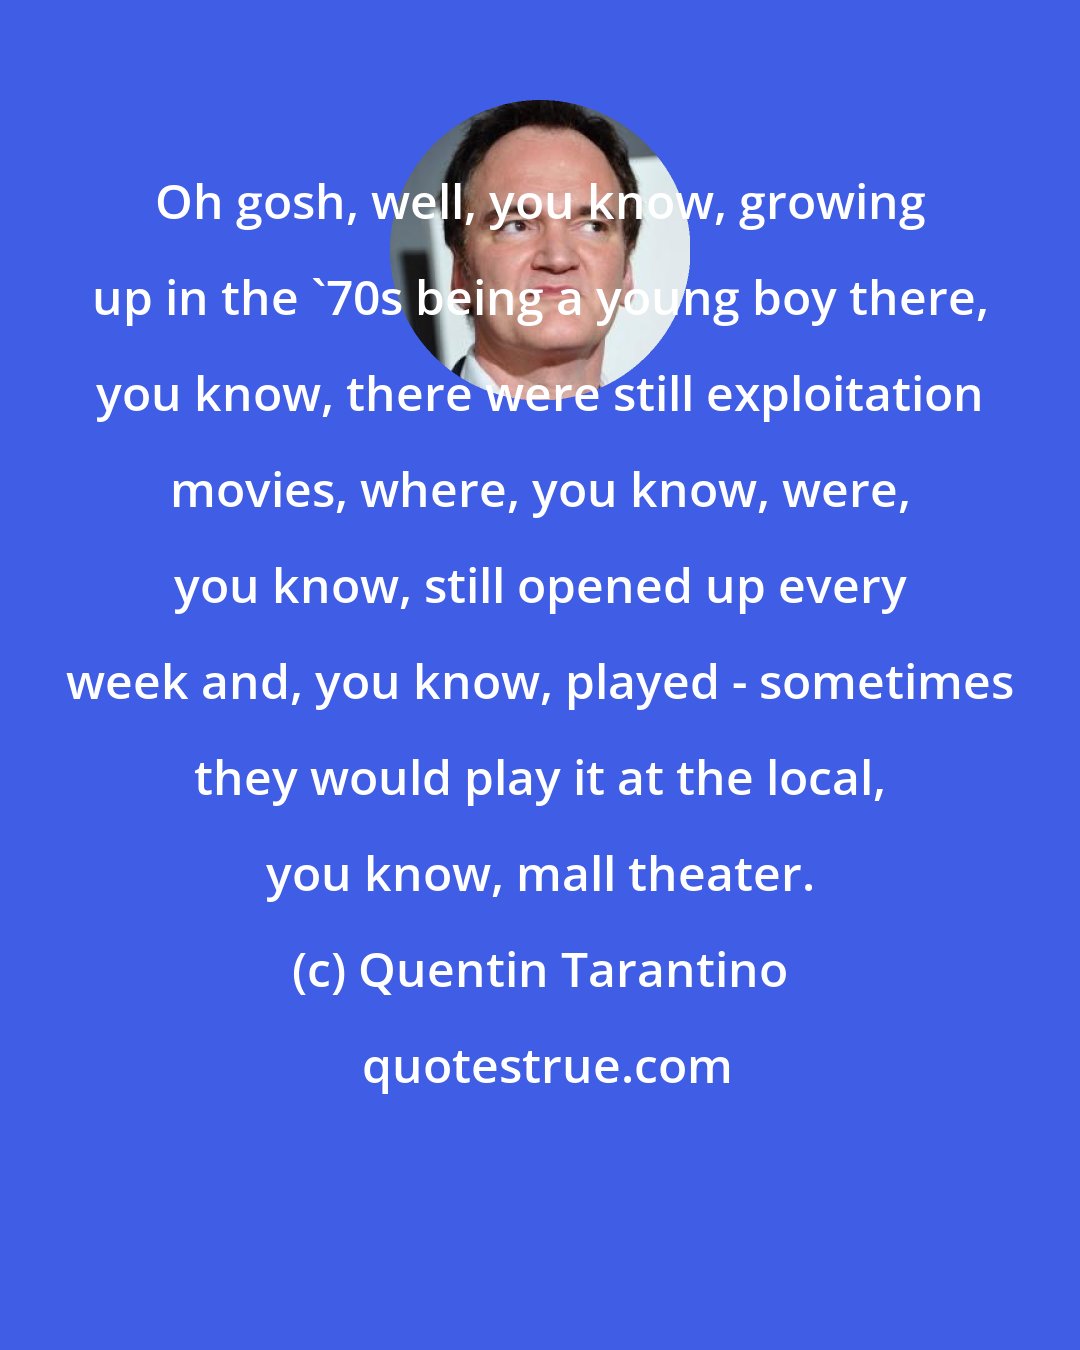 Quentin Tarantino: Oh gosh, well, you know, growing up in the '70s being a young boy there, you know, there were still exploitation movies, where, you know, were, you know, still opened up every week and, you know, played - sometimes they would play it at the local, you know, mall theater.